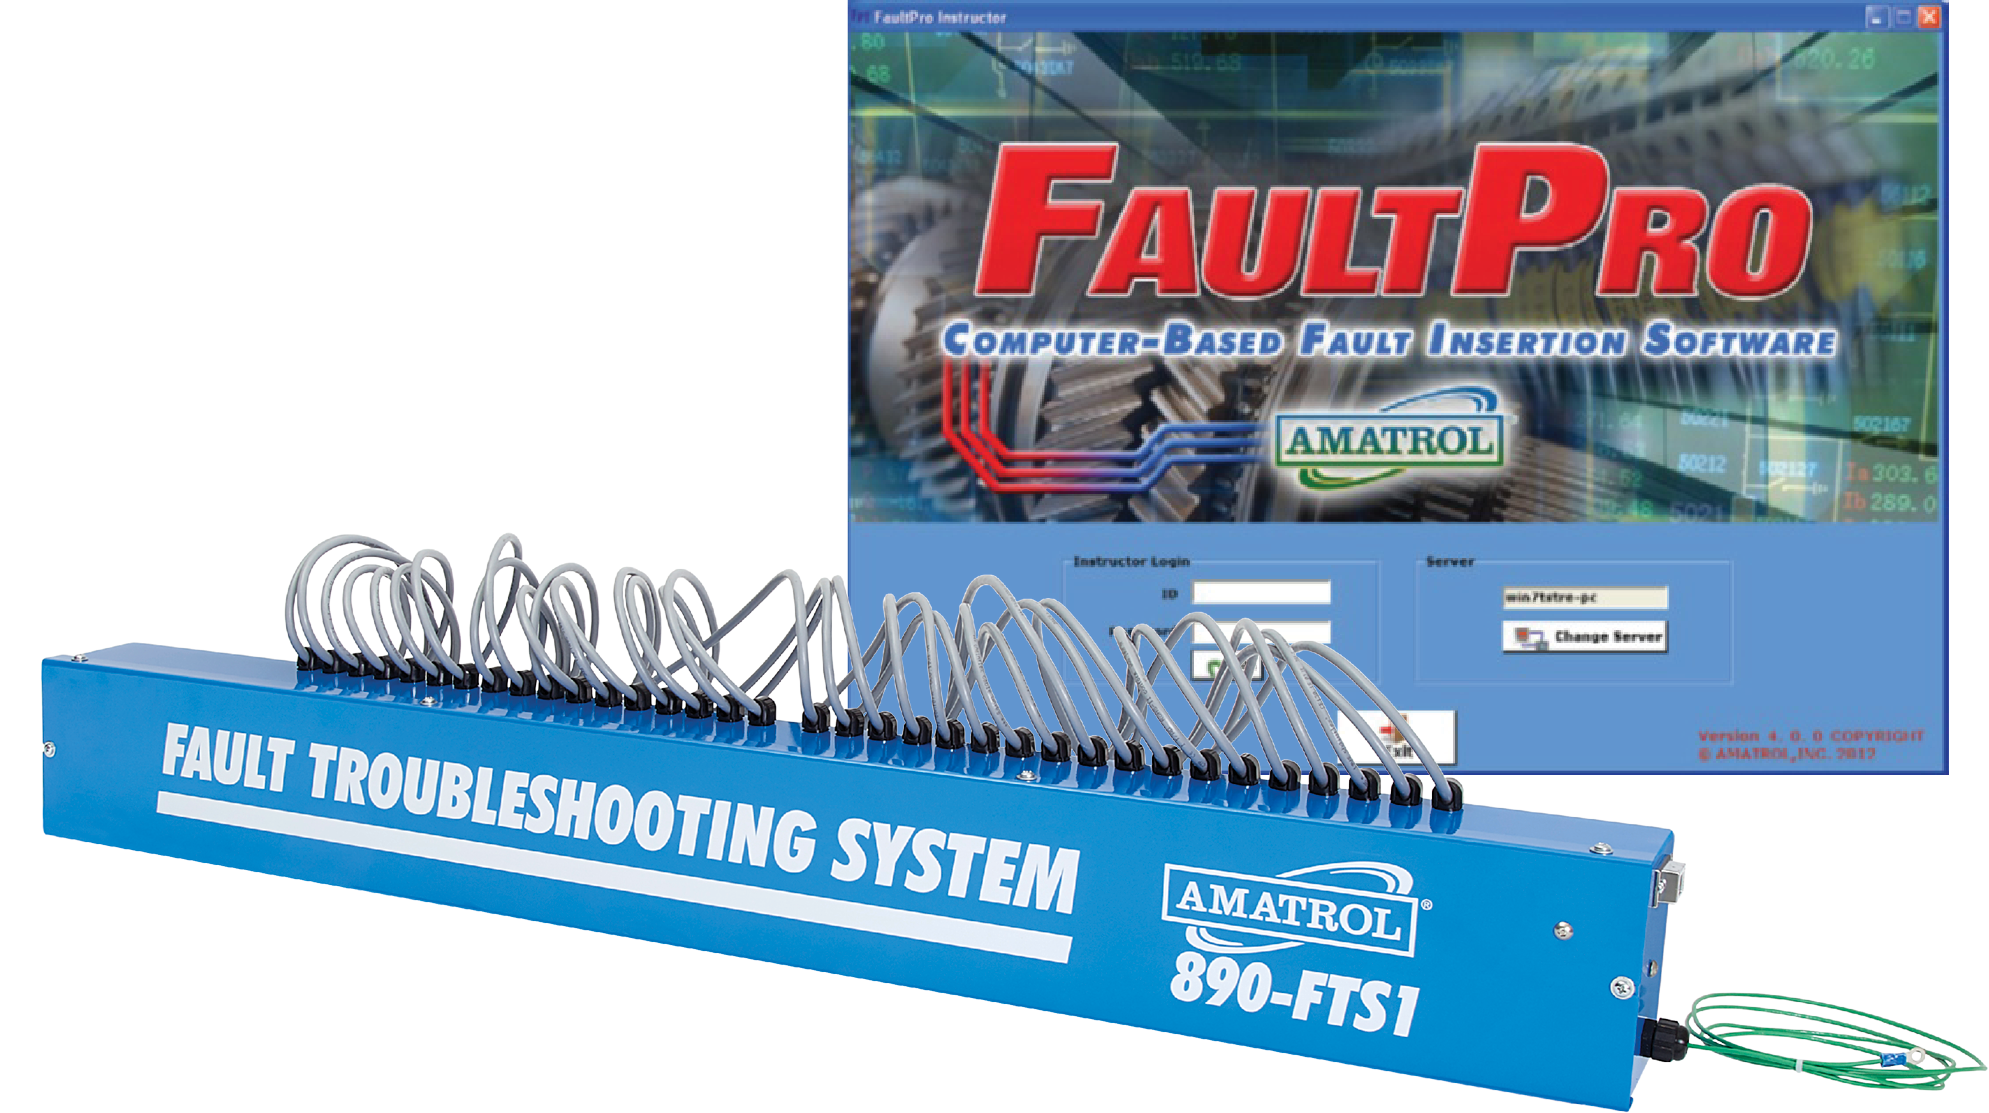 Amatrol Fault Troubleshooting System (890-FTS1)